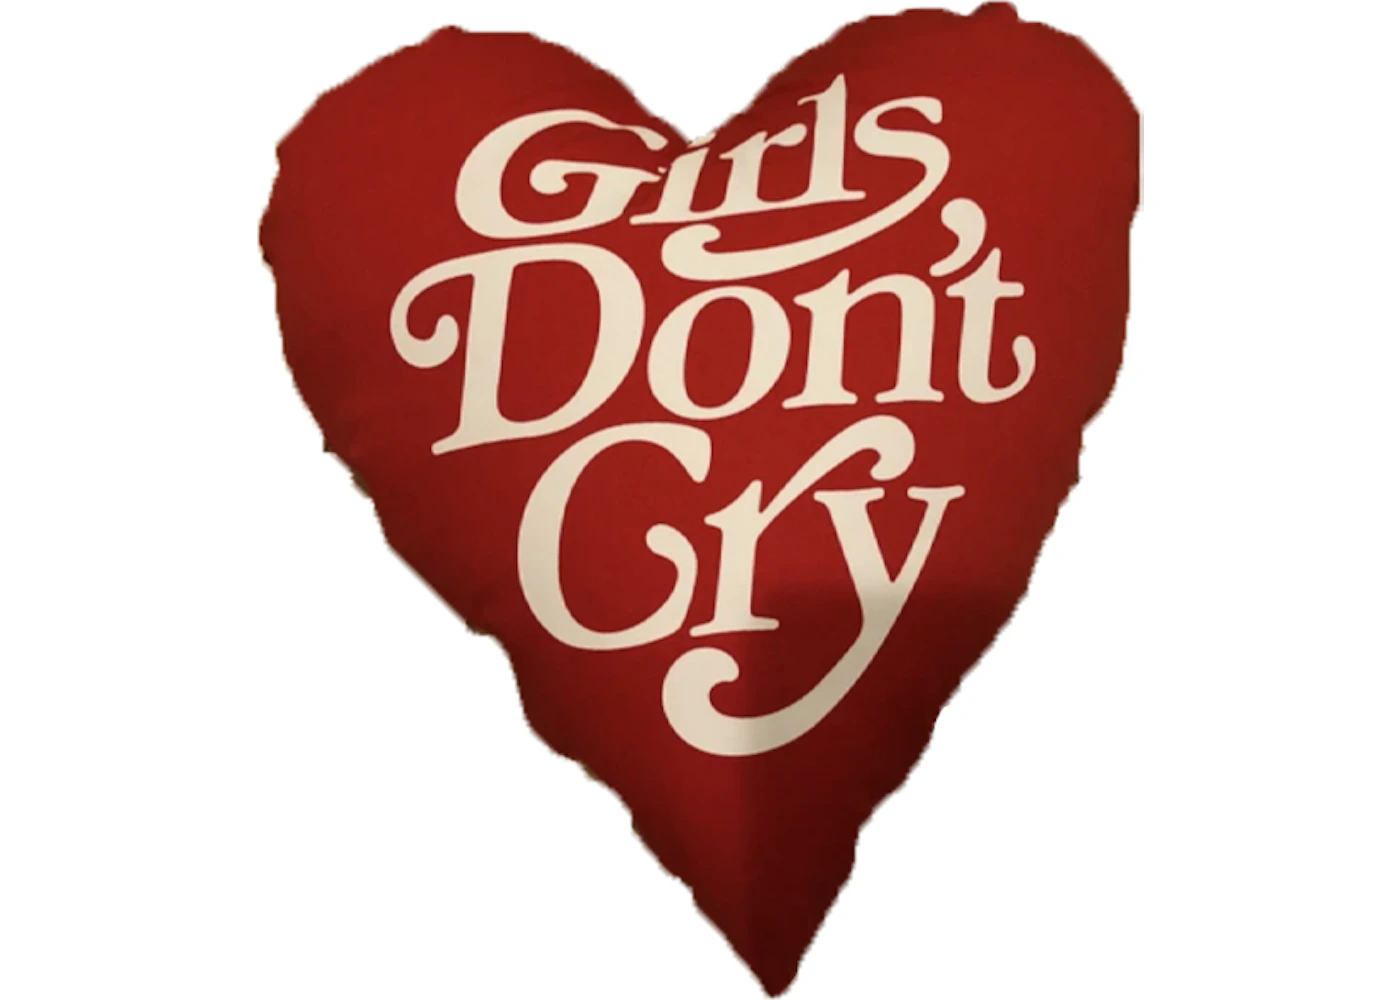 Girls Don't Cry x Girls Don't Cry Pillow Red/White - SS19 - US